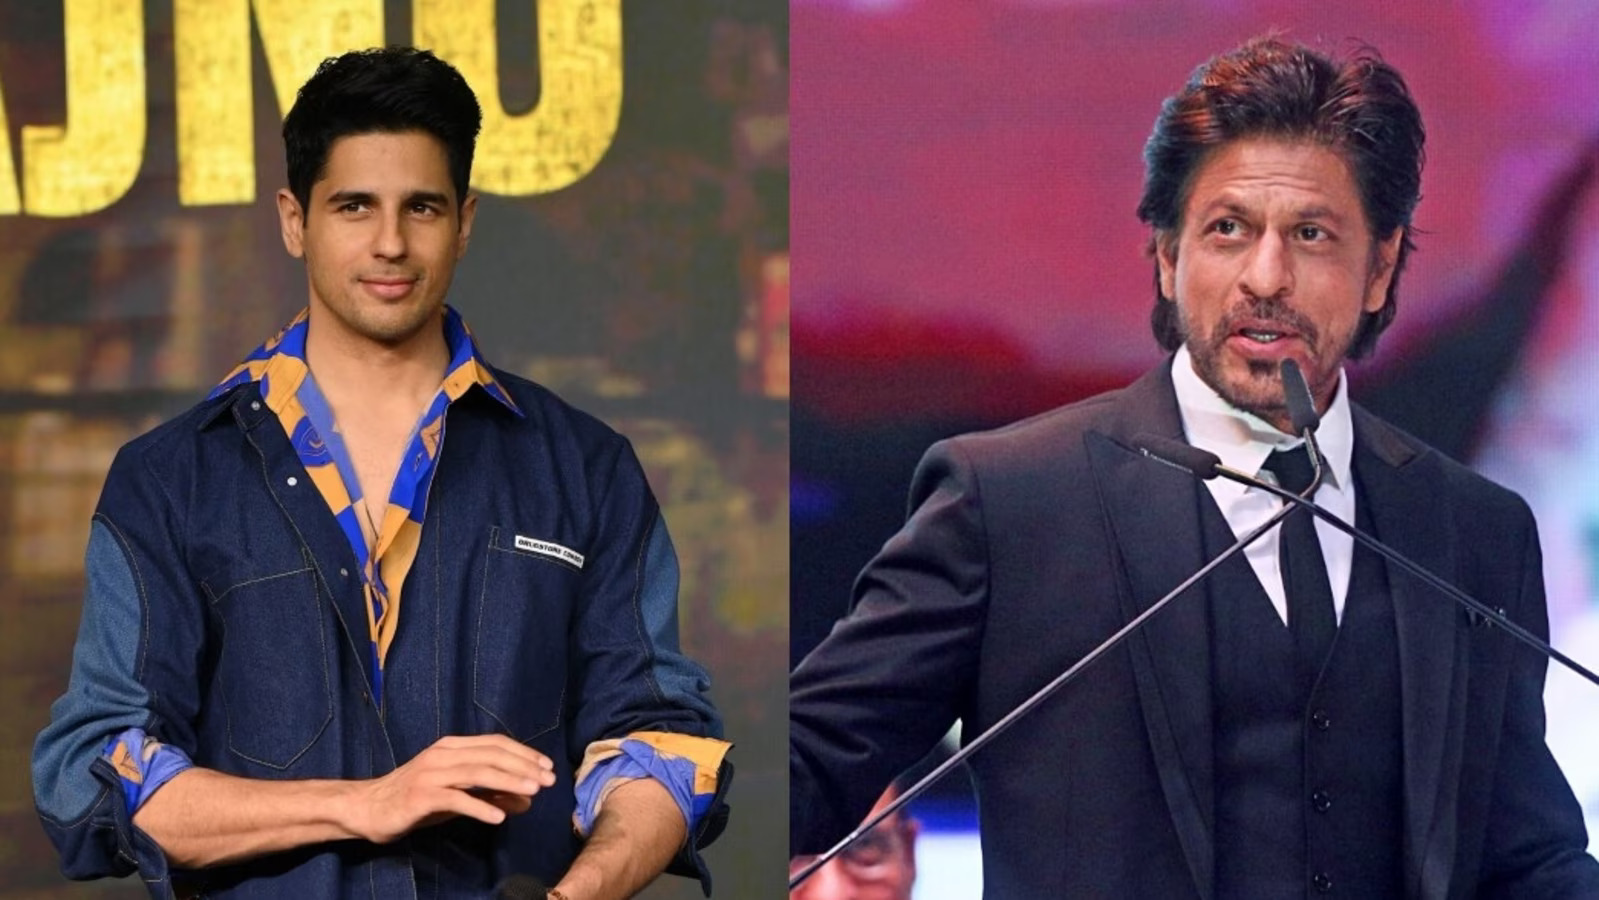 Sidharth Malhotra says he 'couldn't speak at all' When he met Shah Rukh Khan